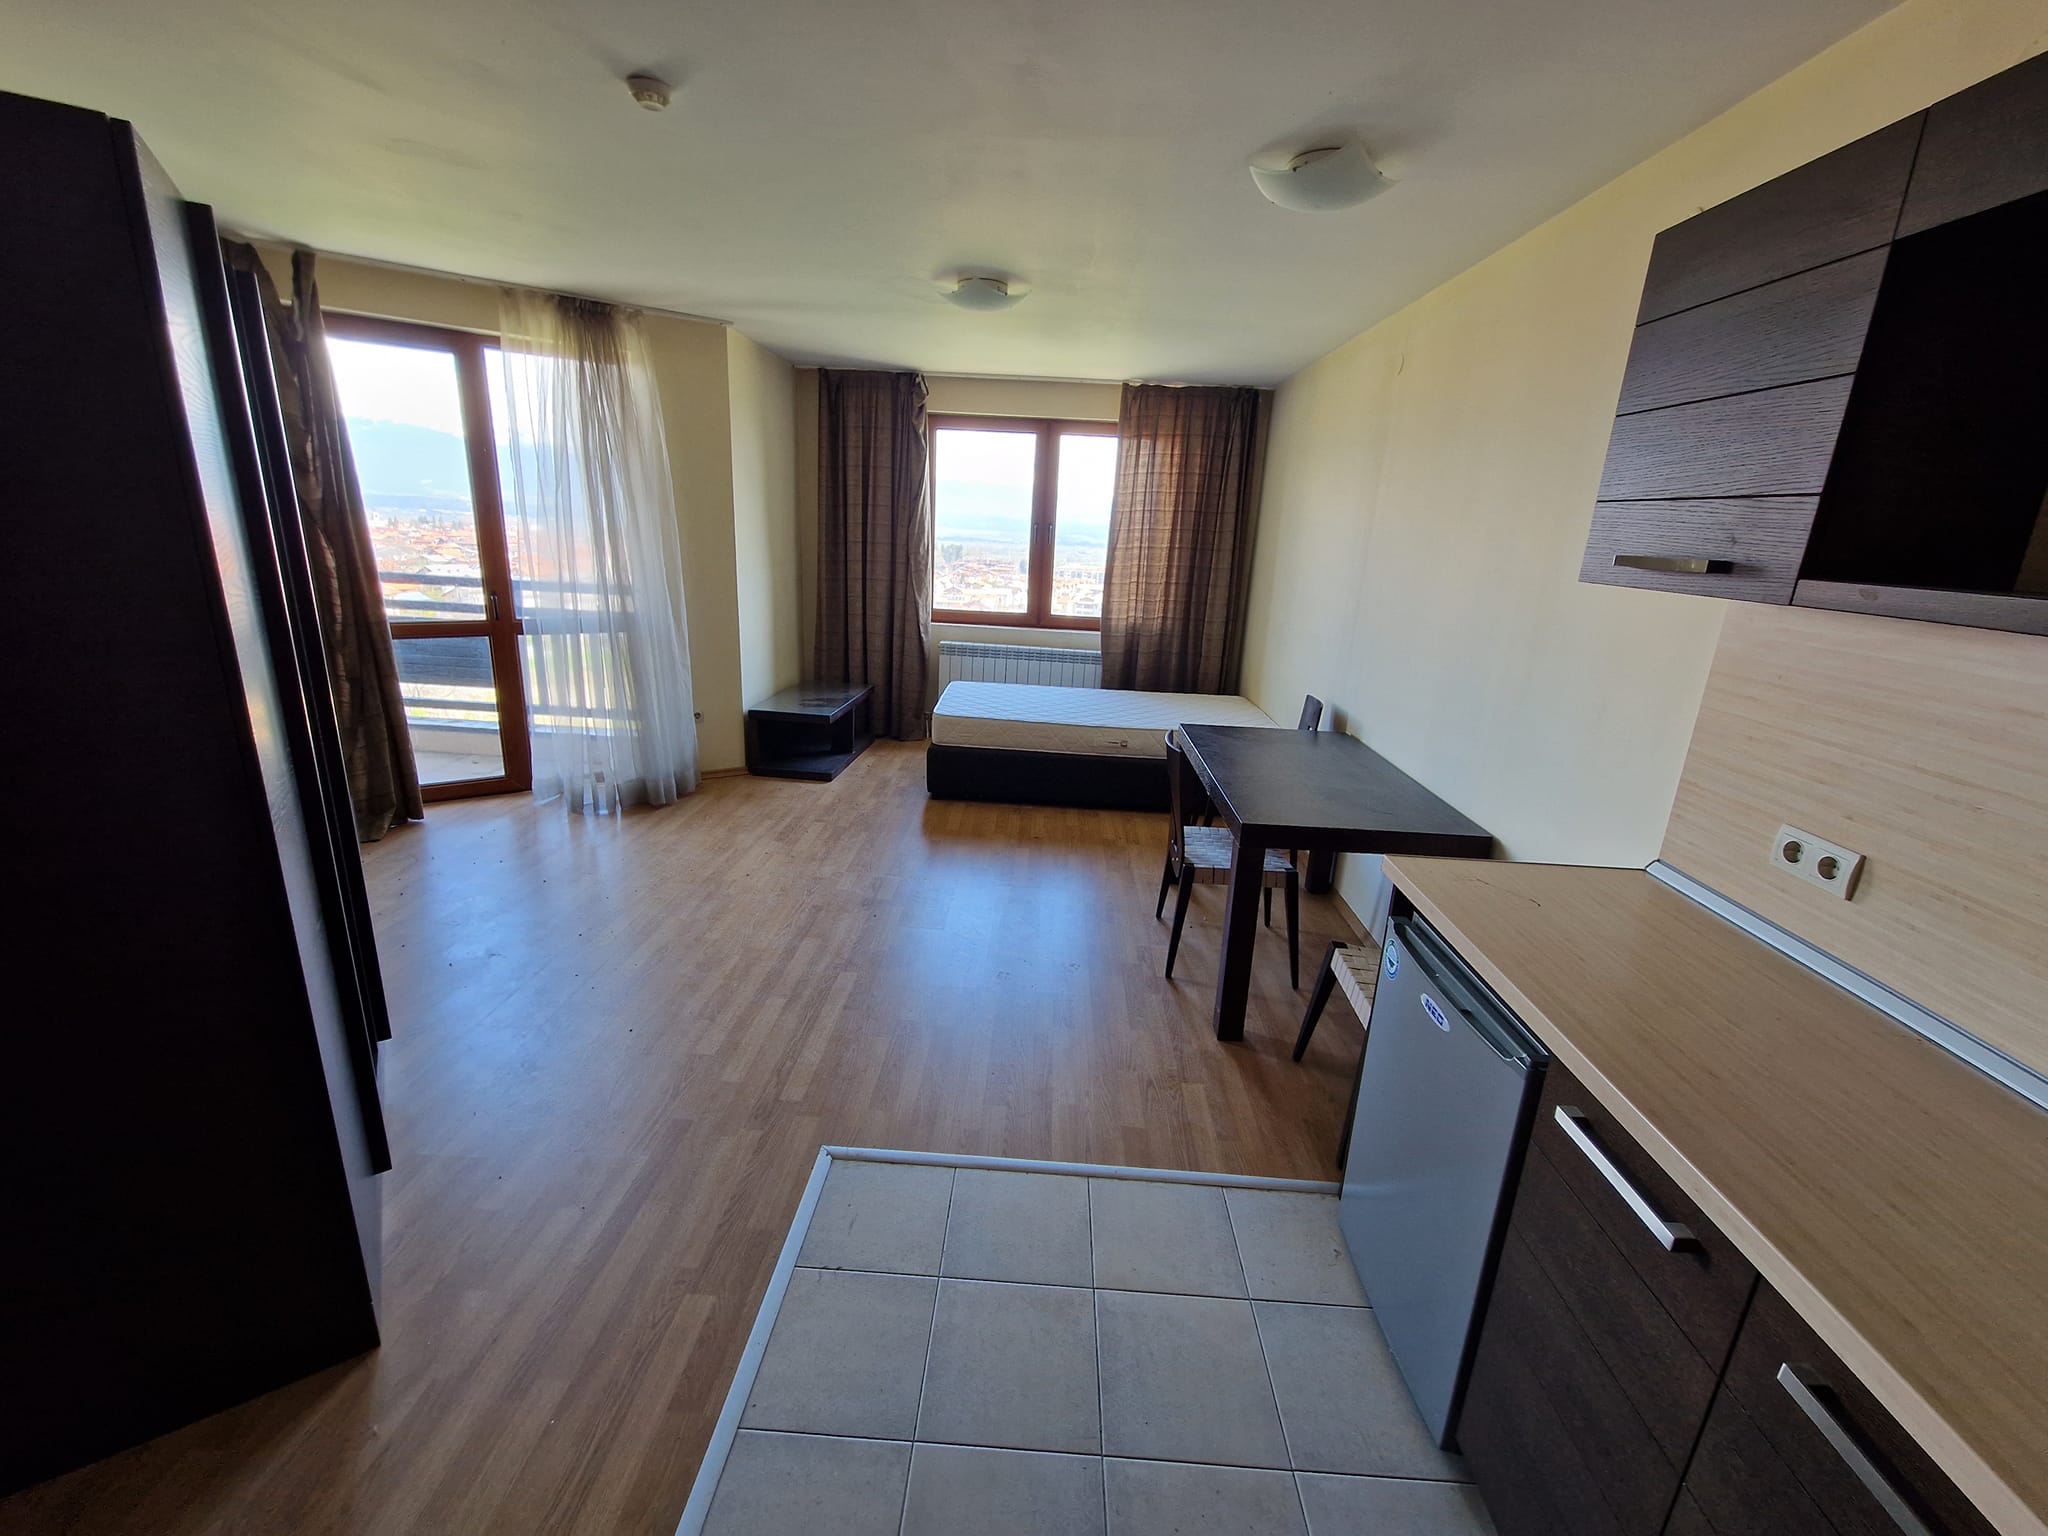 Bansko: Two bedroom apartment for sale with a panoramic view